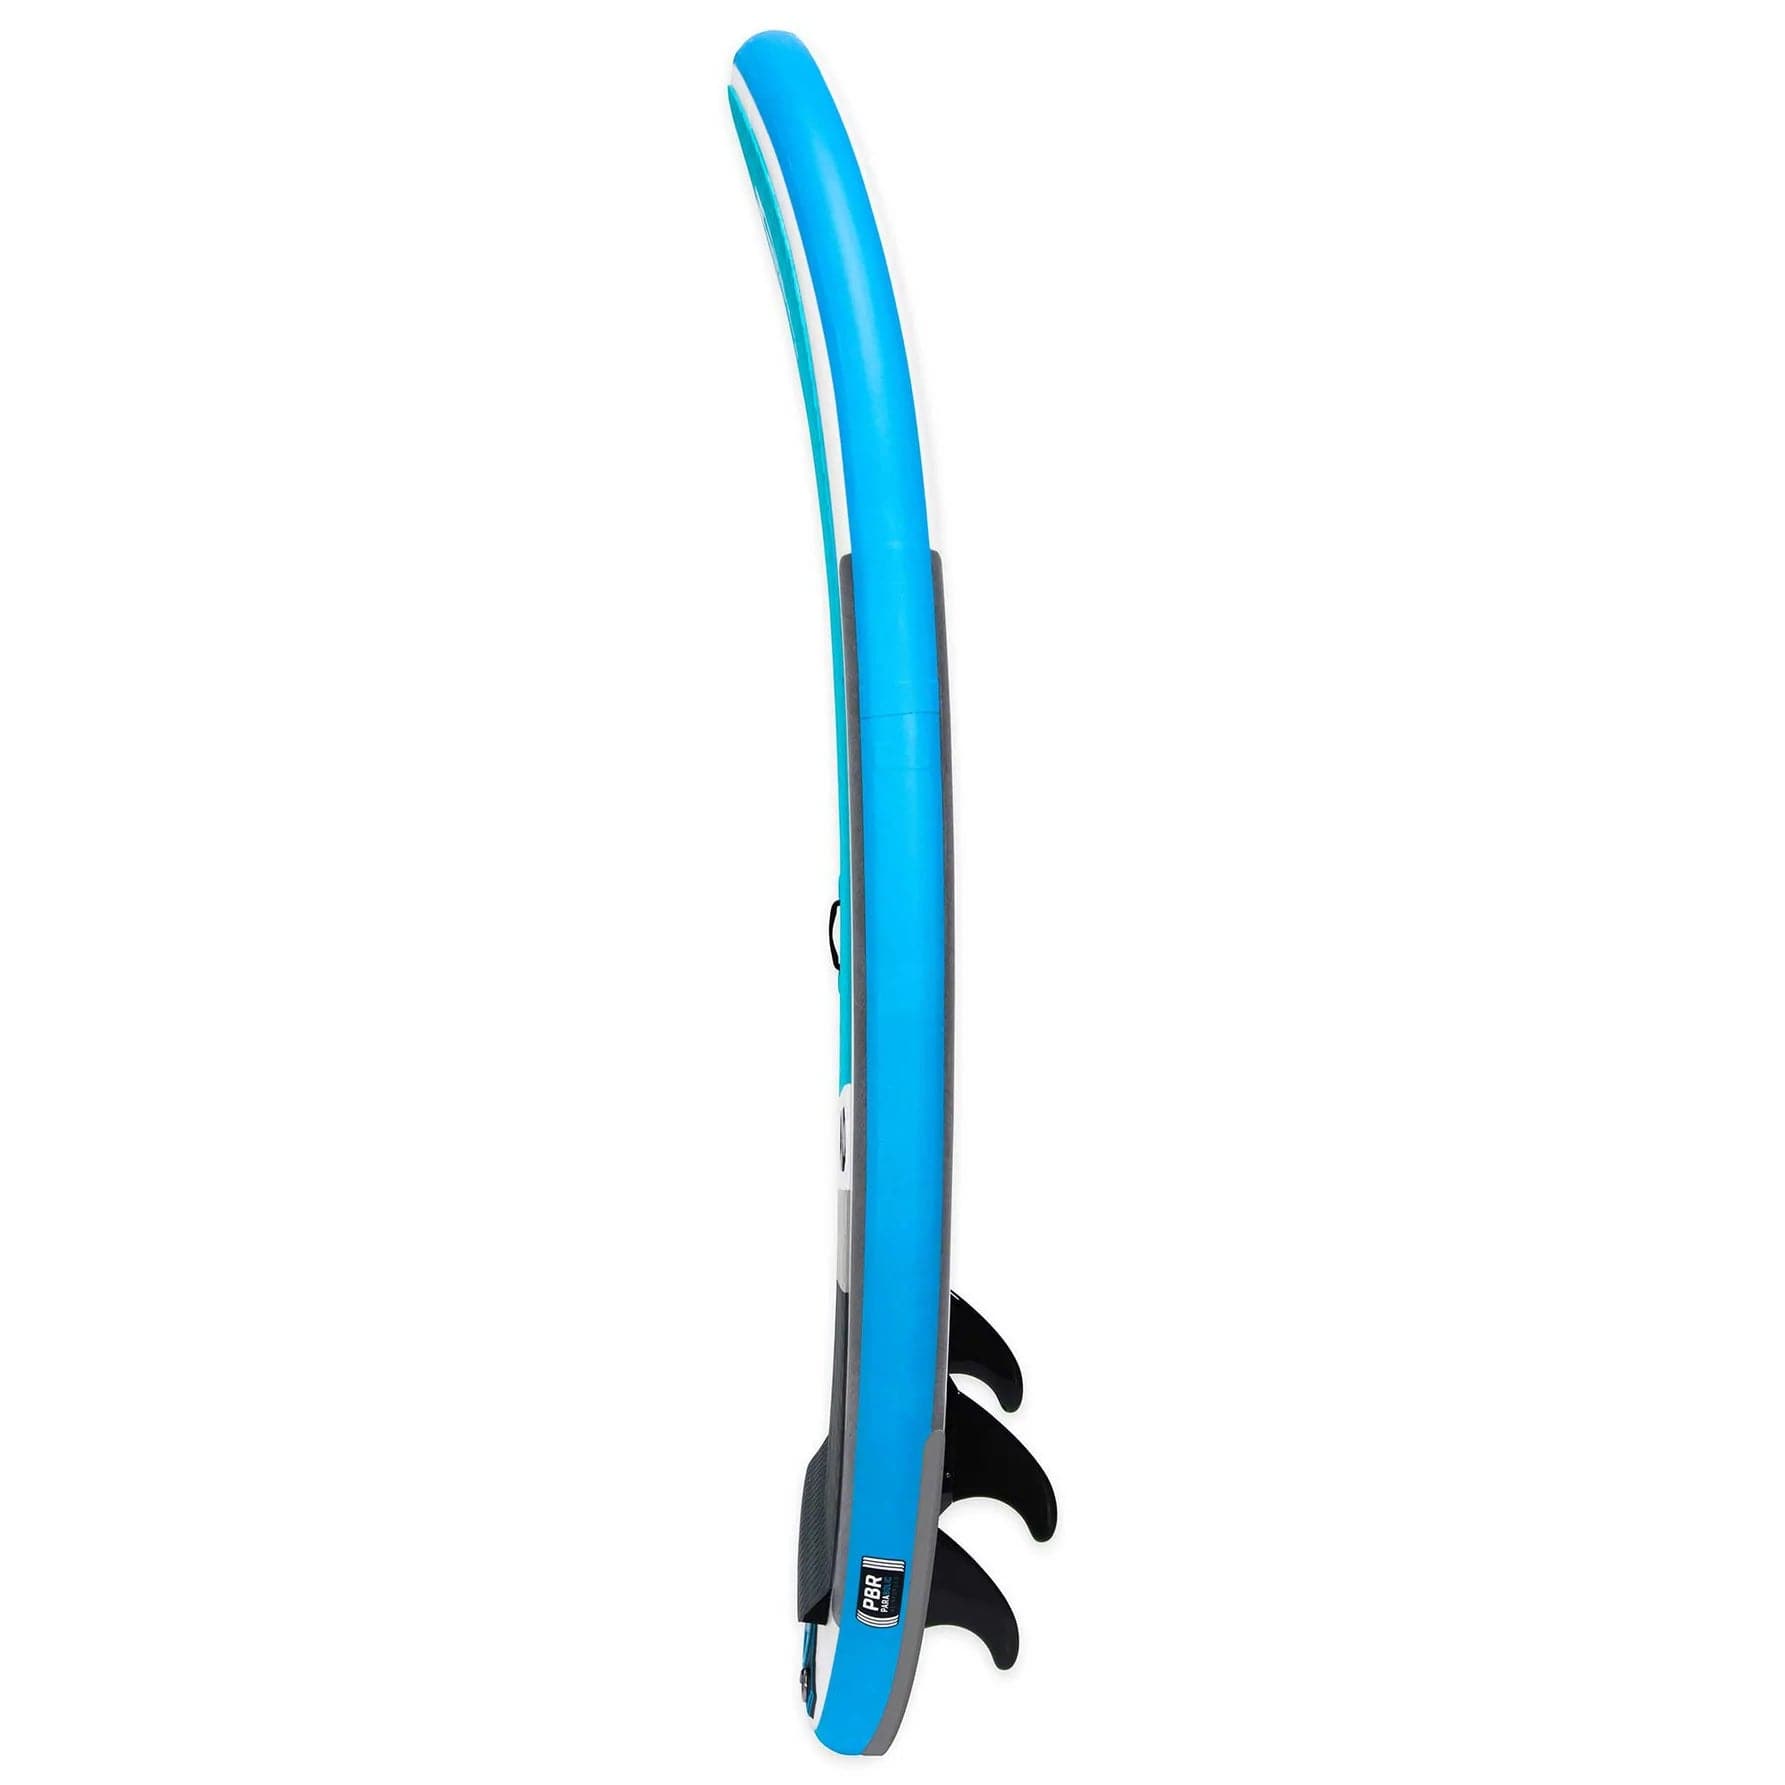 Featuring the Wavo Wiki beginner sup, river surfing, whitewater sup manufactured by Badfish shown here from a second angle.